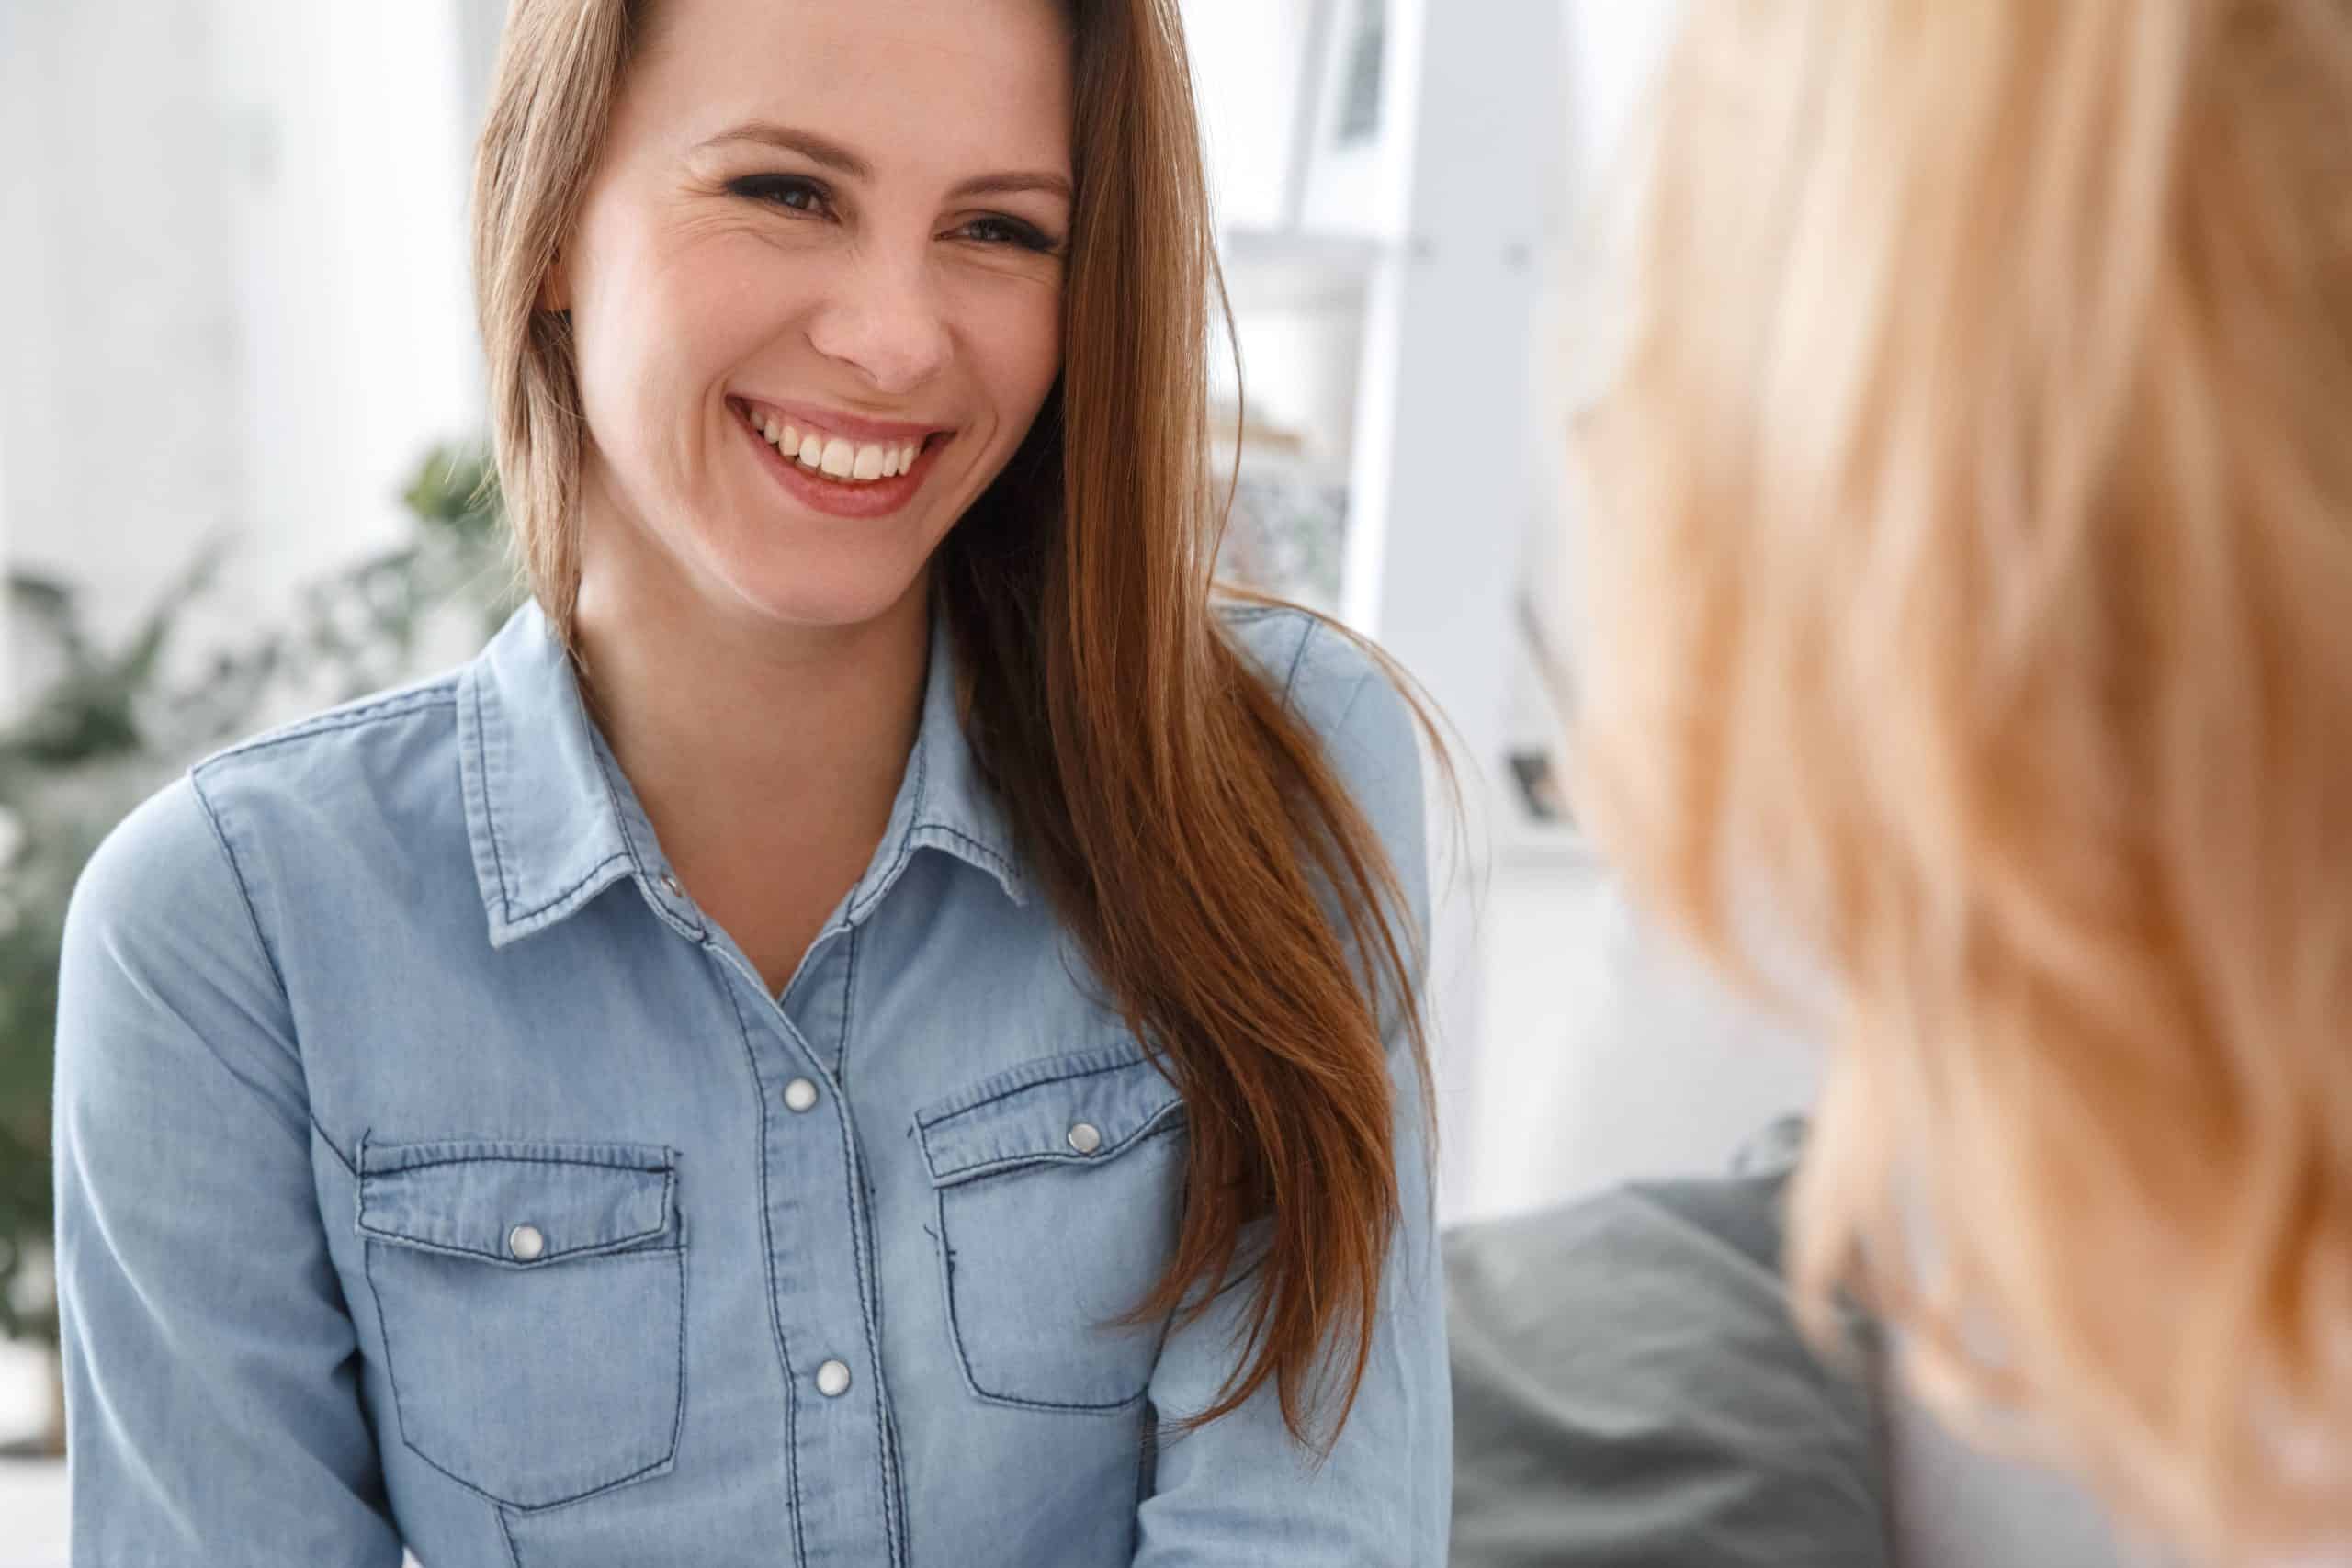 Woman smiling and looking at another woman who has her back turned